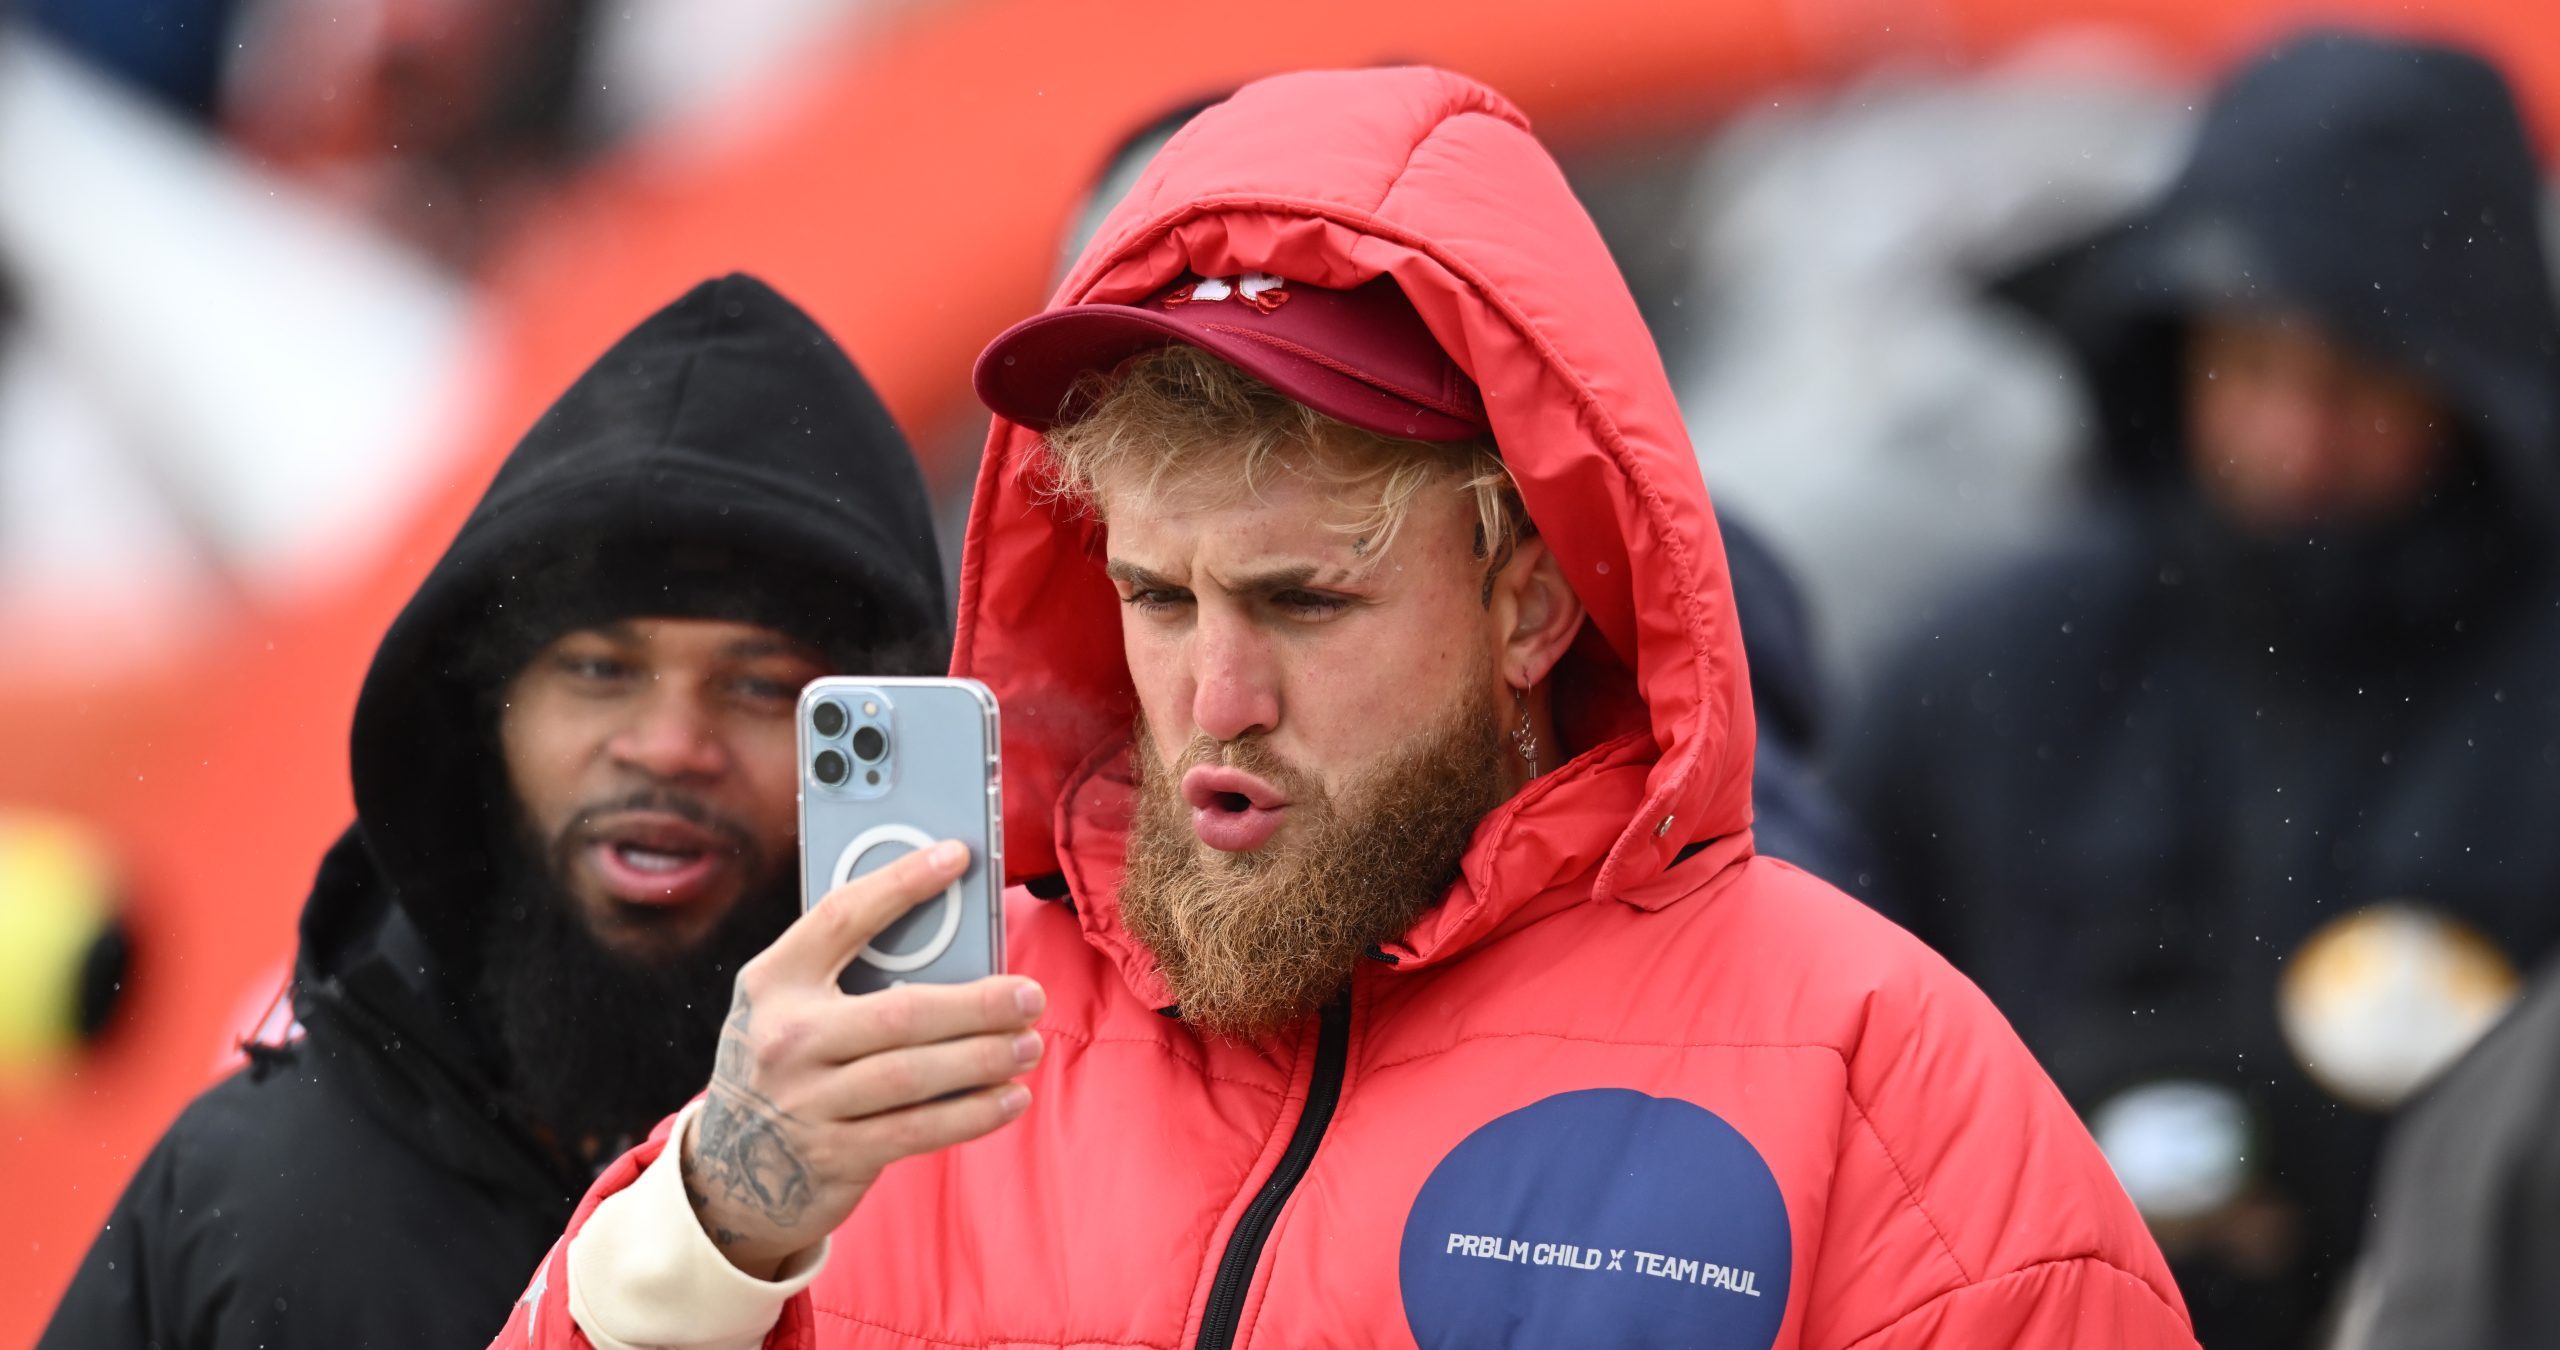 Dec 24, 2022; Cleveland, Ohio, USA; Jake Paul records a video on the field before the game between the Cleveland Browns and the New Orleans Saints at FirstEnergy Stadium. Mandatory Credit: Ken Blaze-USA TODAY Sports